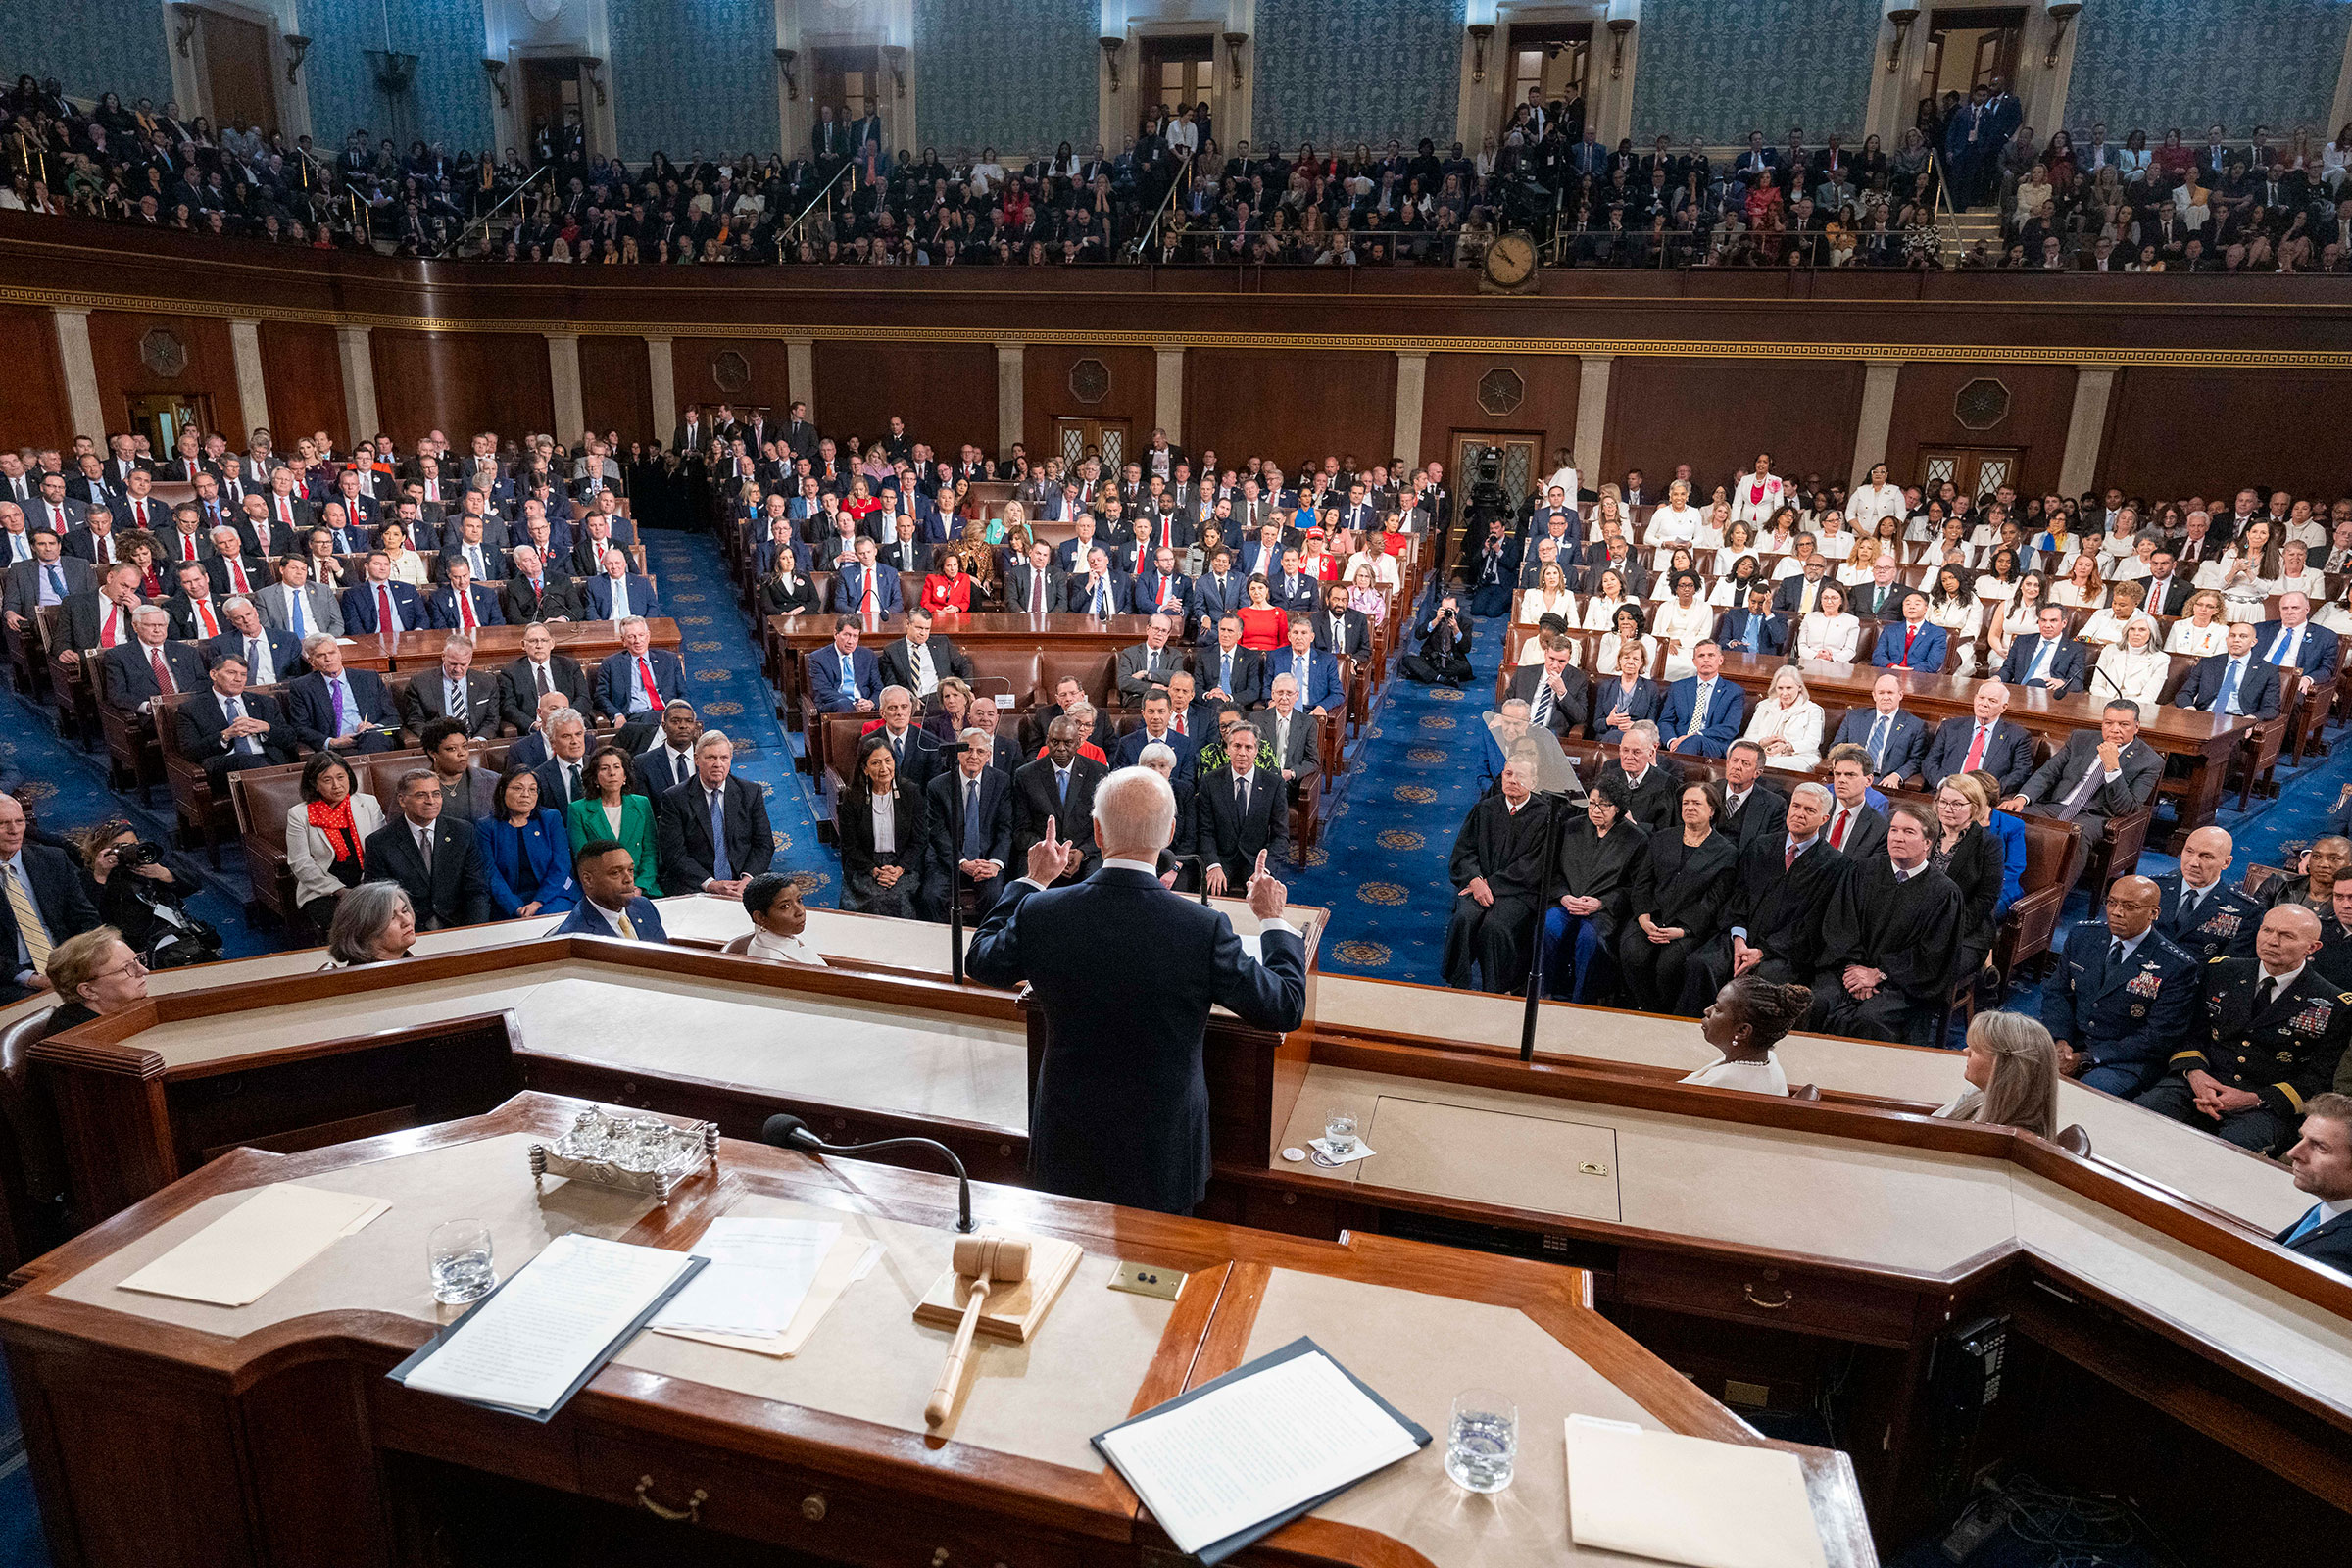 President Joe Biden delivers the annual State of the Union address before a joint session of Congress in the House chamber at the Capital building on March 7 in Washington, DC. 